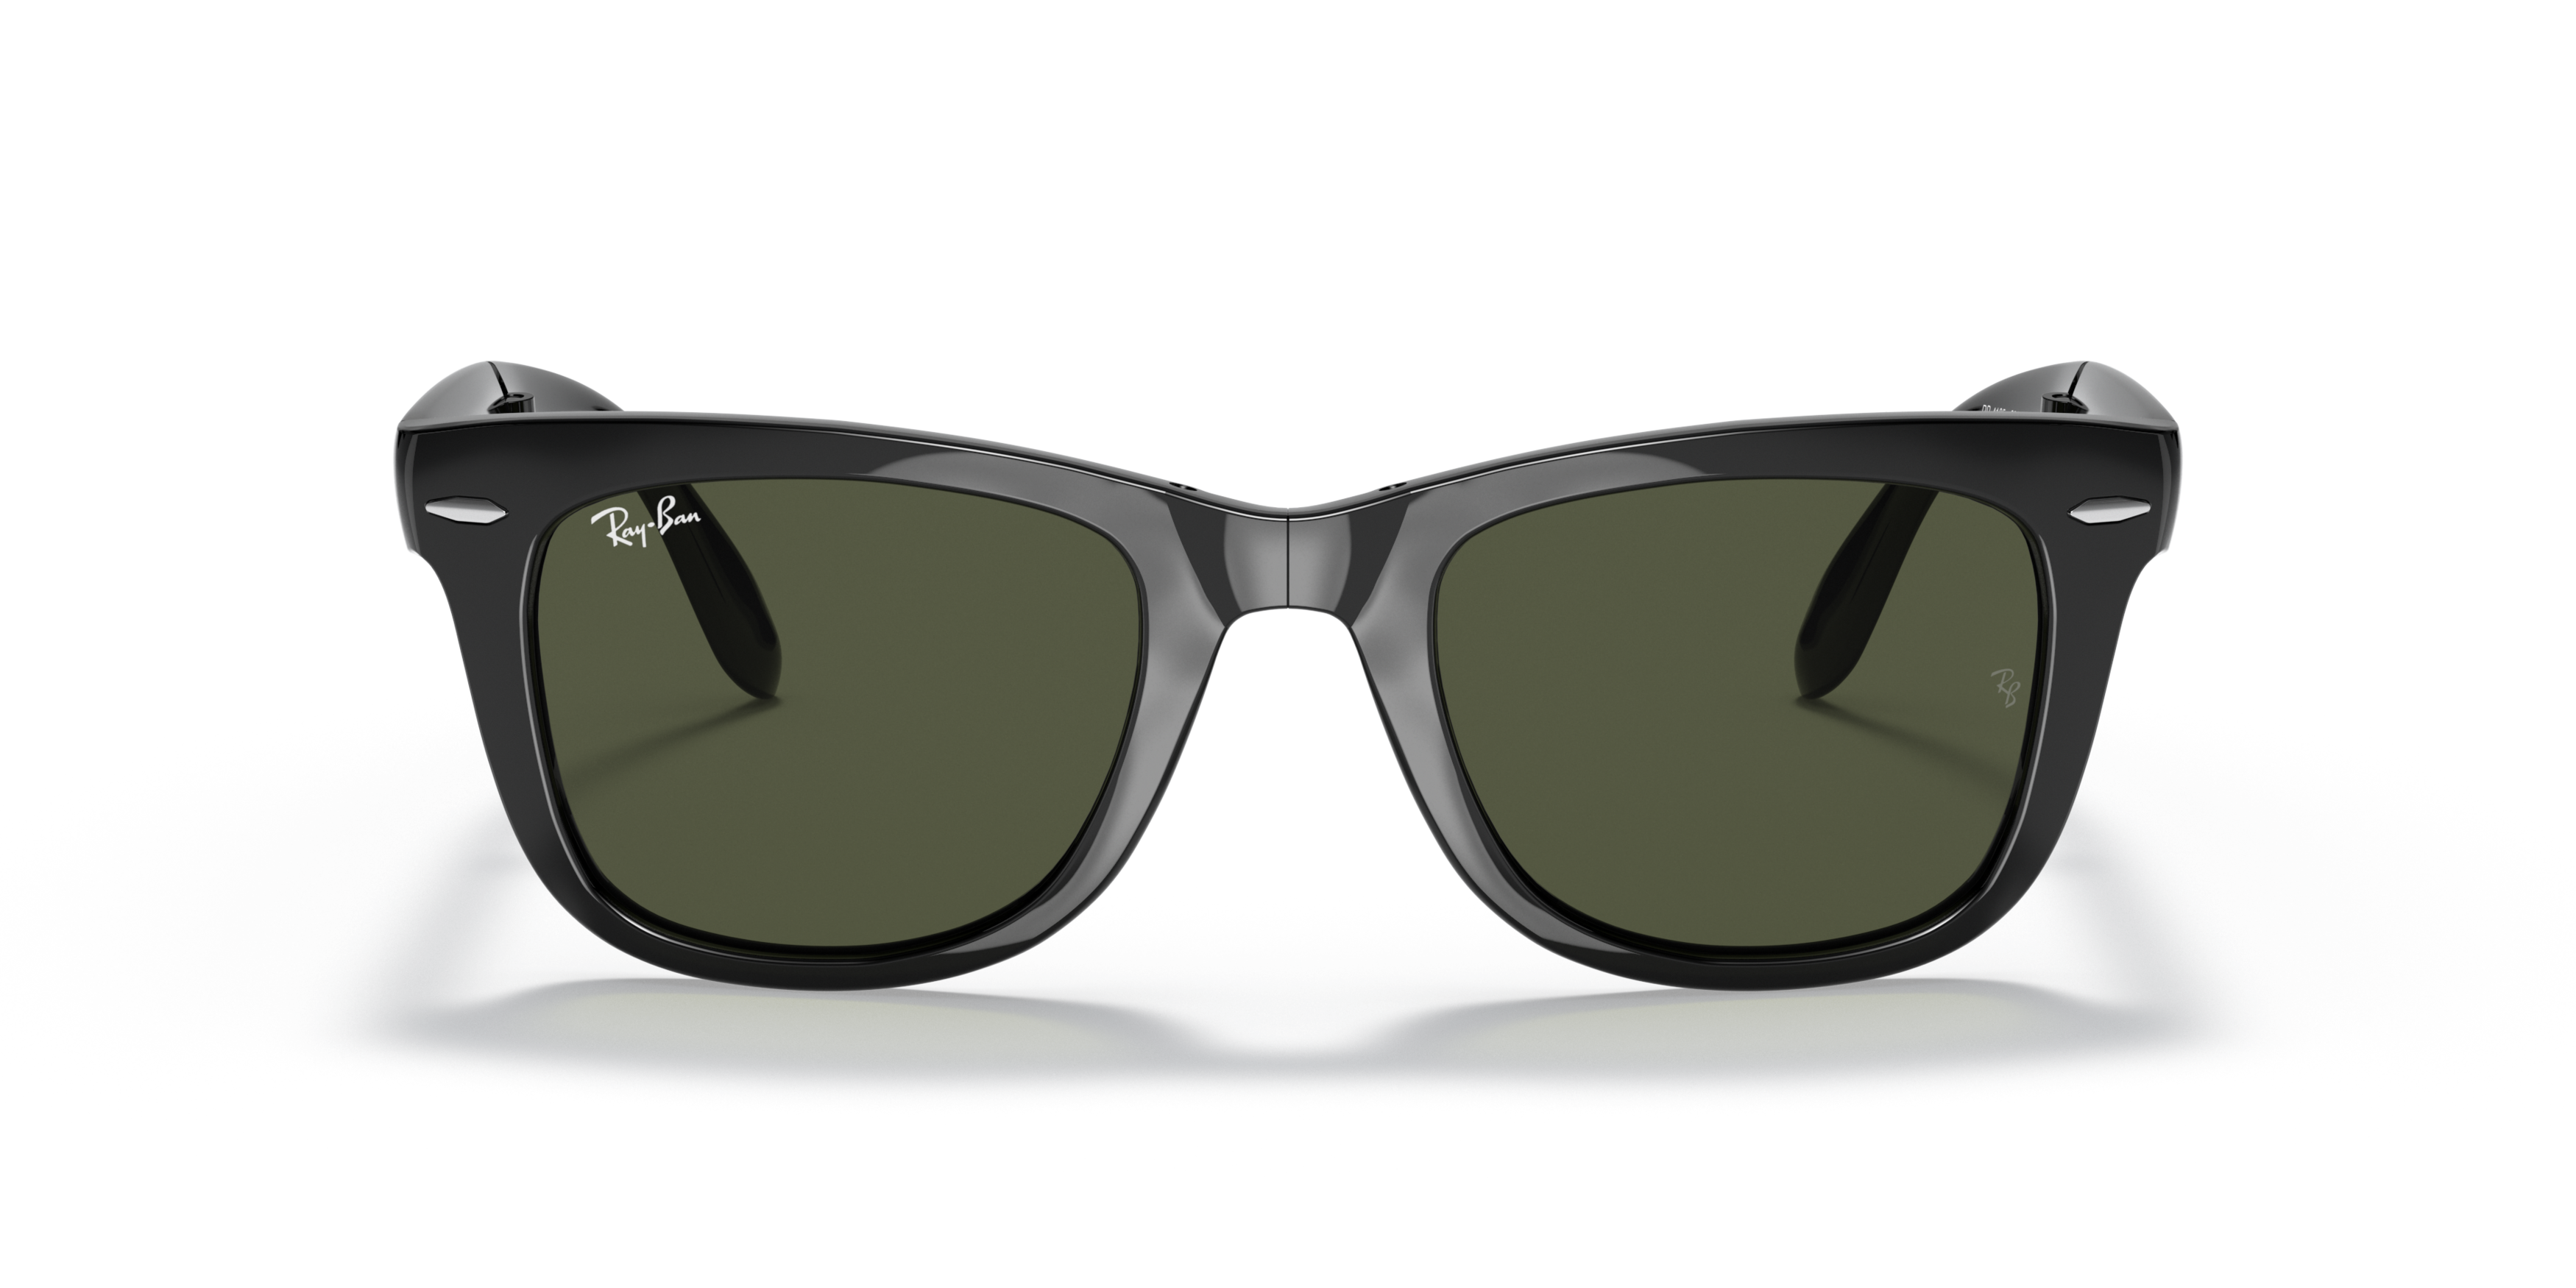 [products.image.front] Ray-Ban Wayfarer Folding Classic RB4105 601